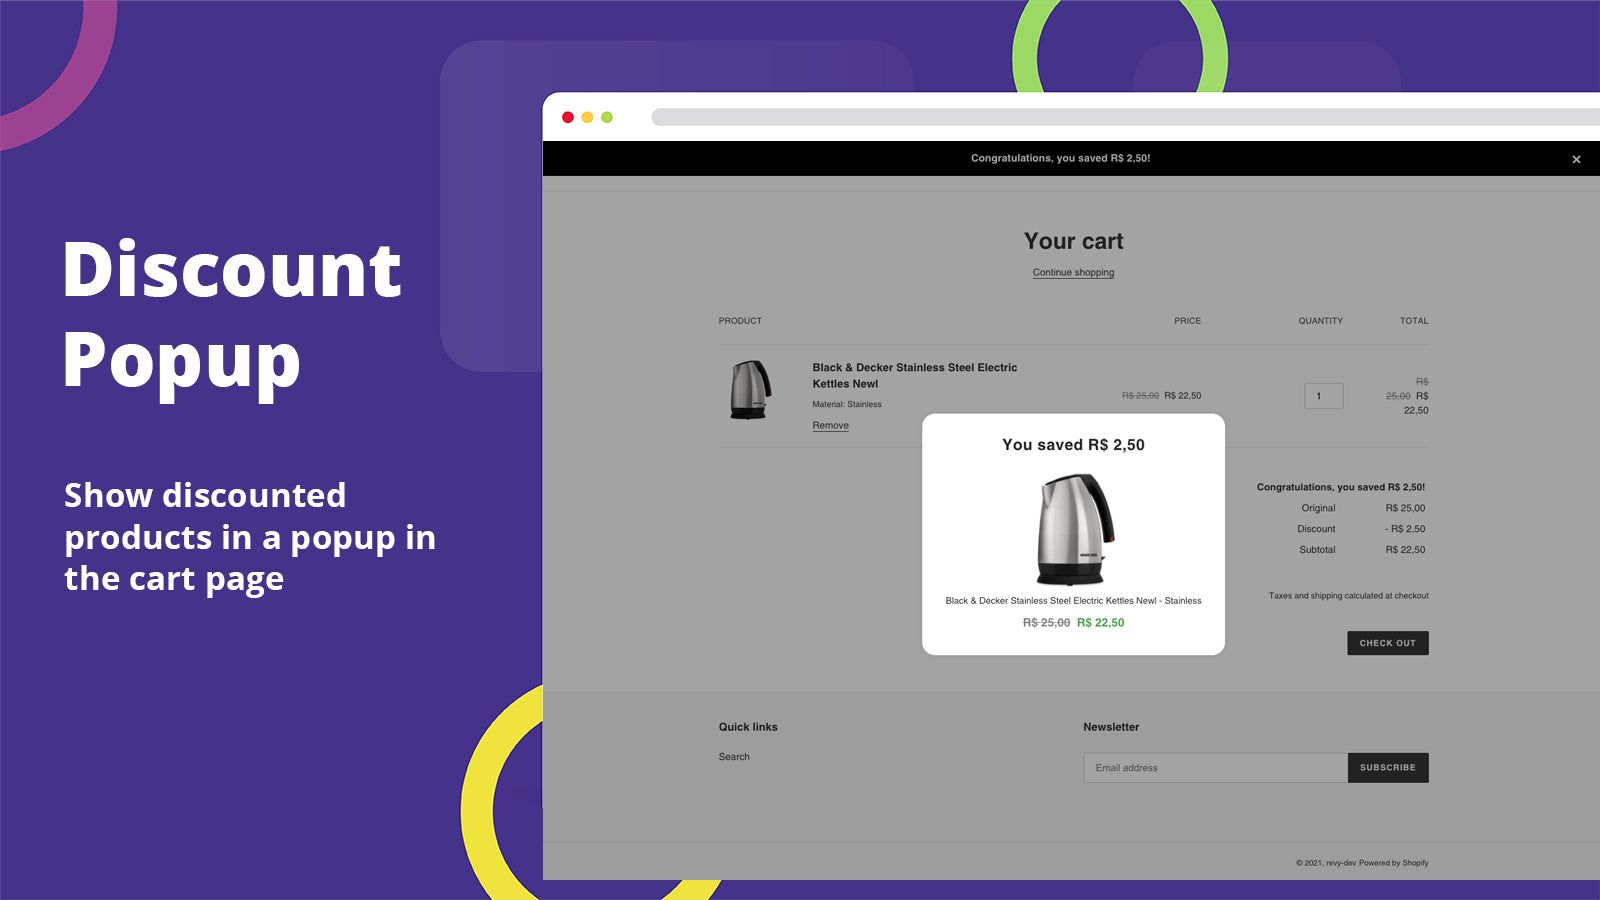 Show a discount popup in the cart page to capture the attention